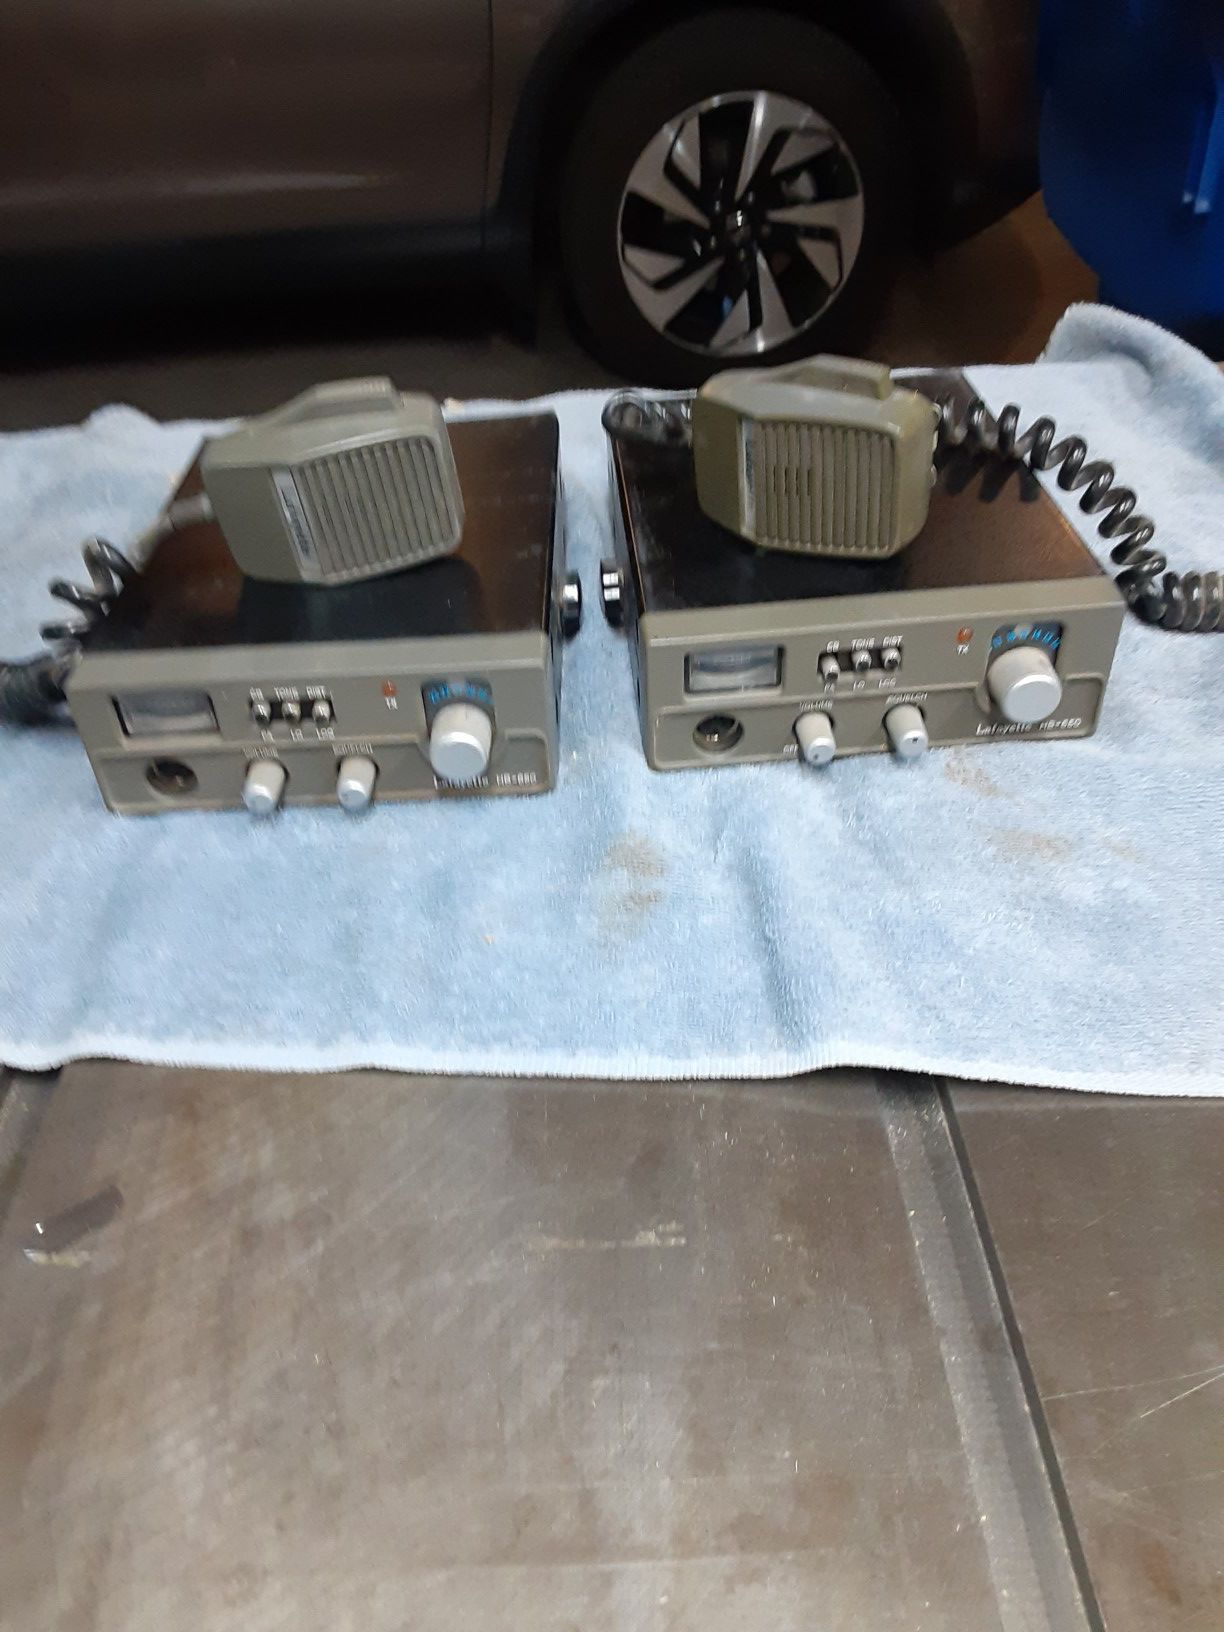 2 Lafayette HB650,s Cb Radios $50.00 buys both. Cash Only